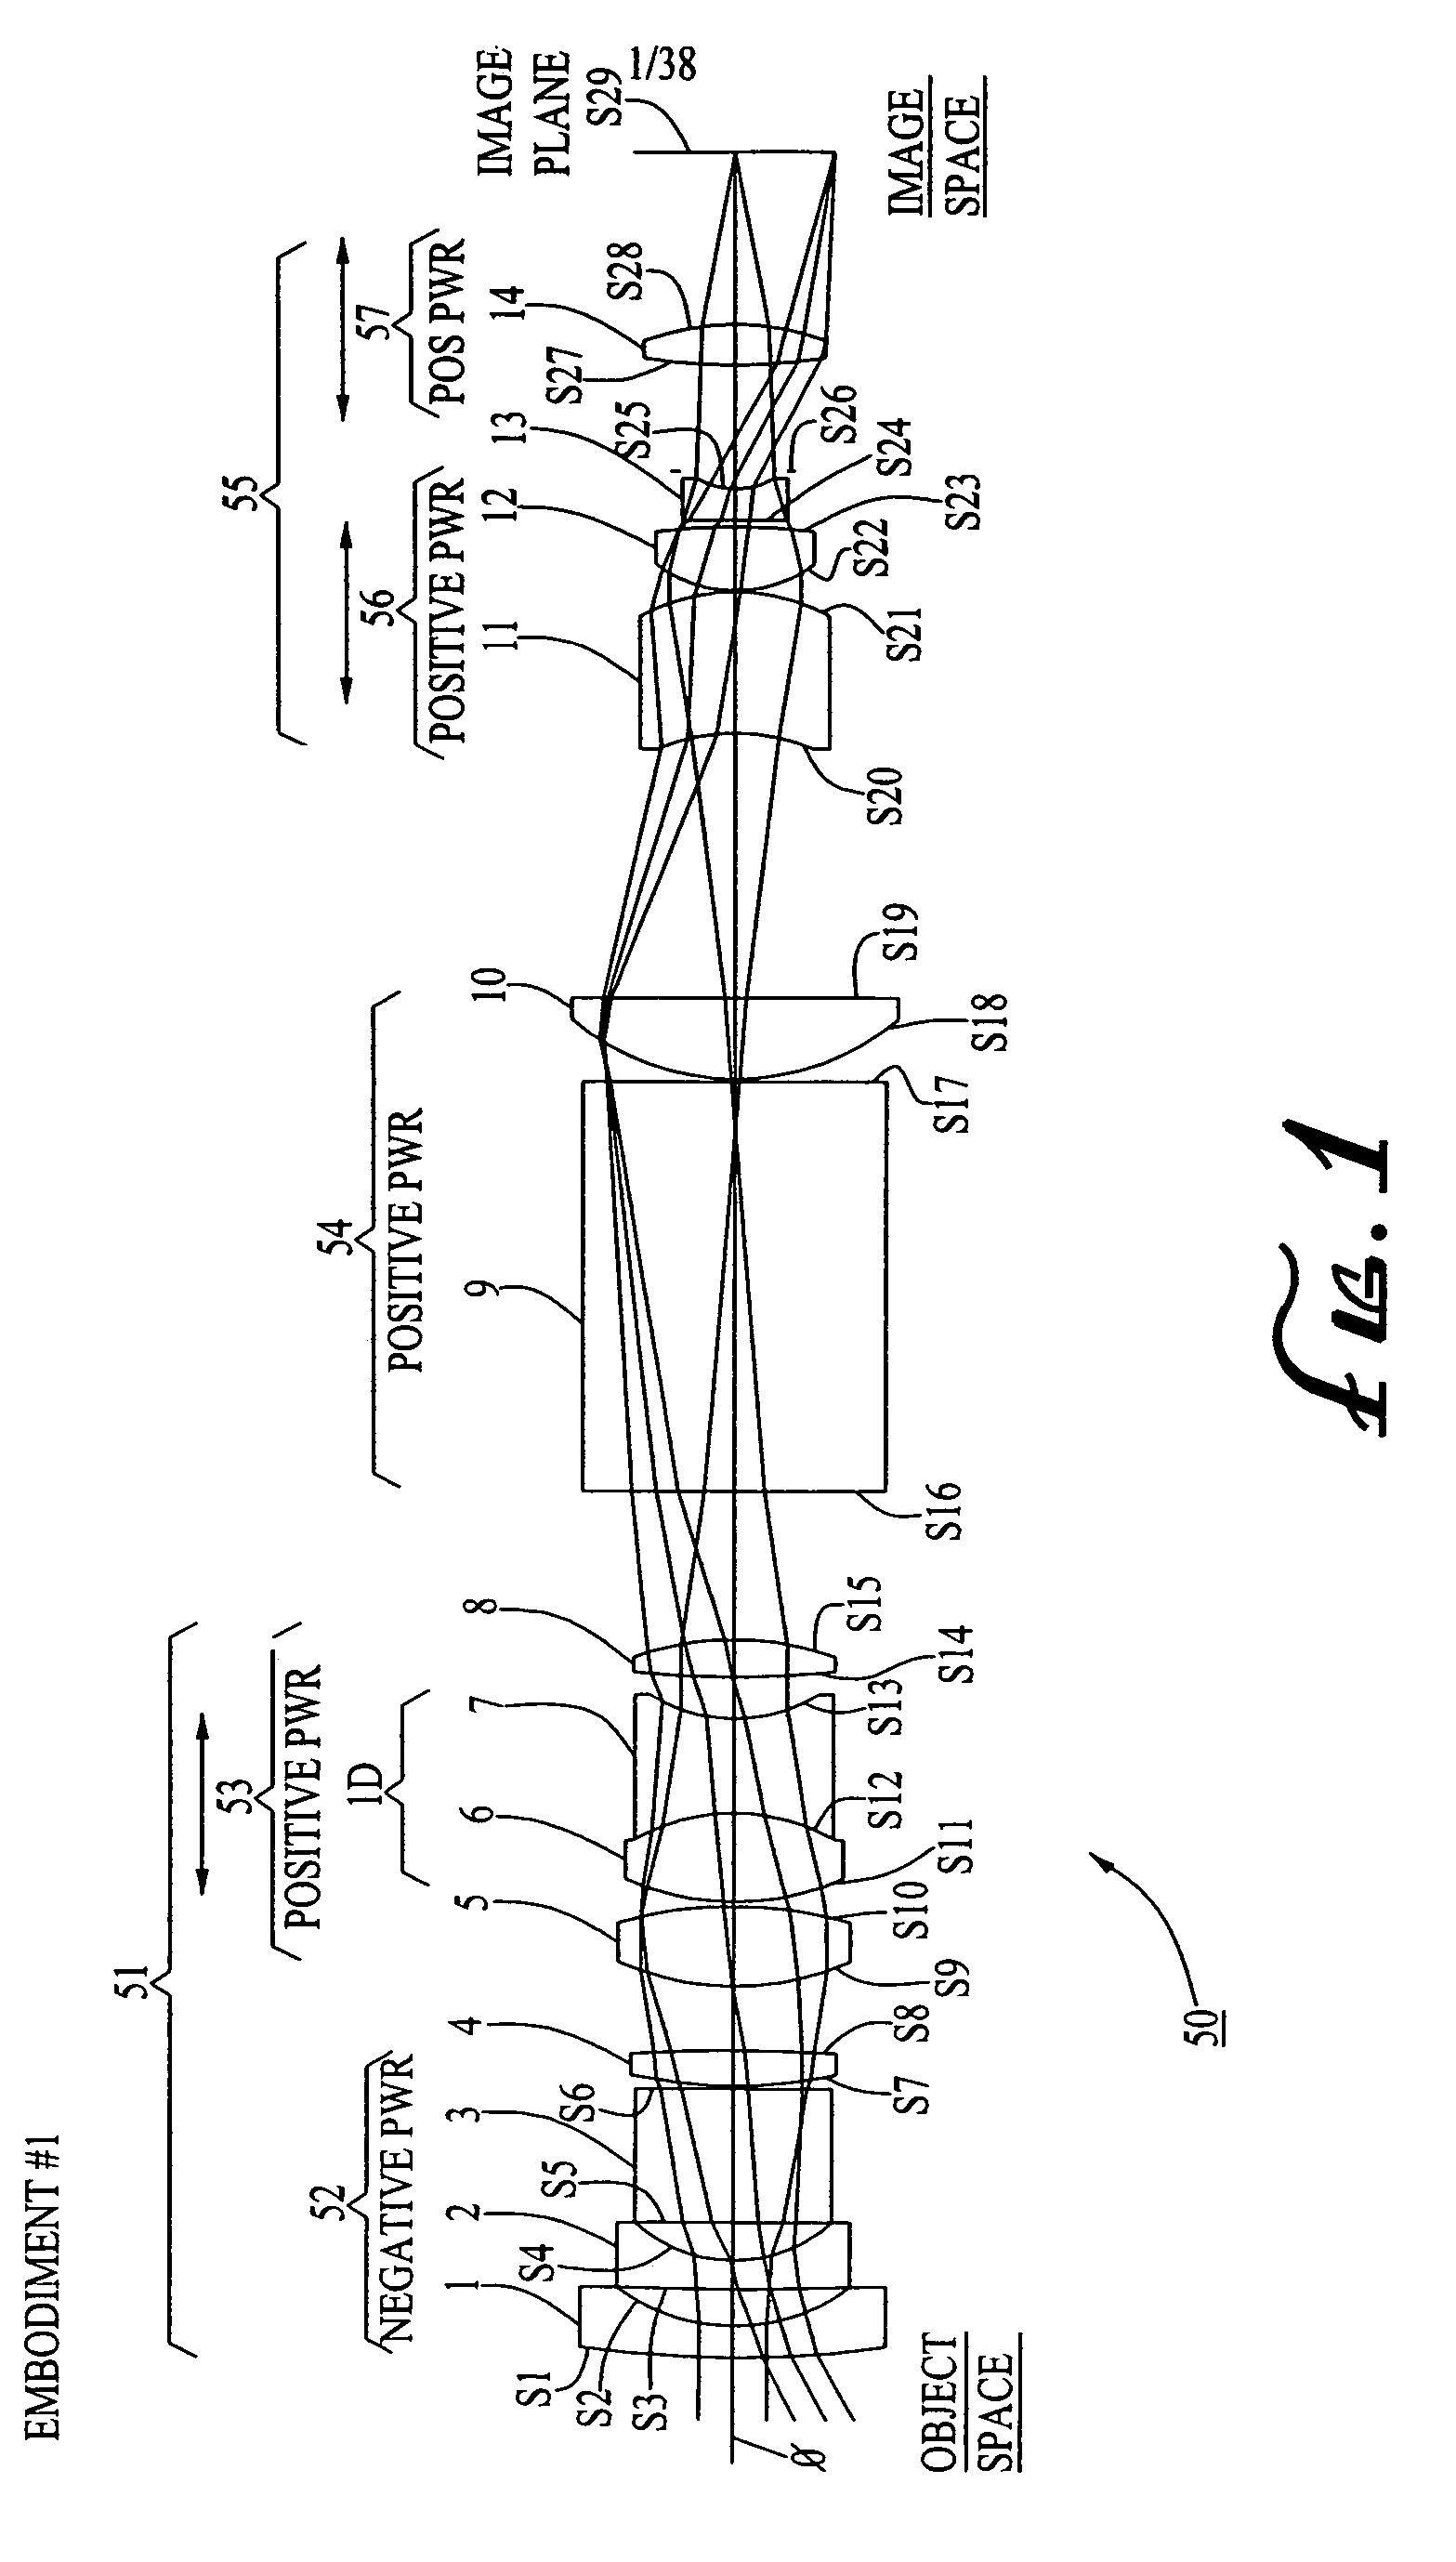 Wide-range, wide-angle compound zoom with simplified zooming structure